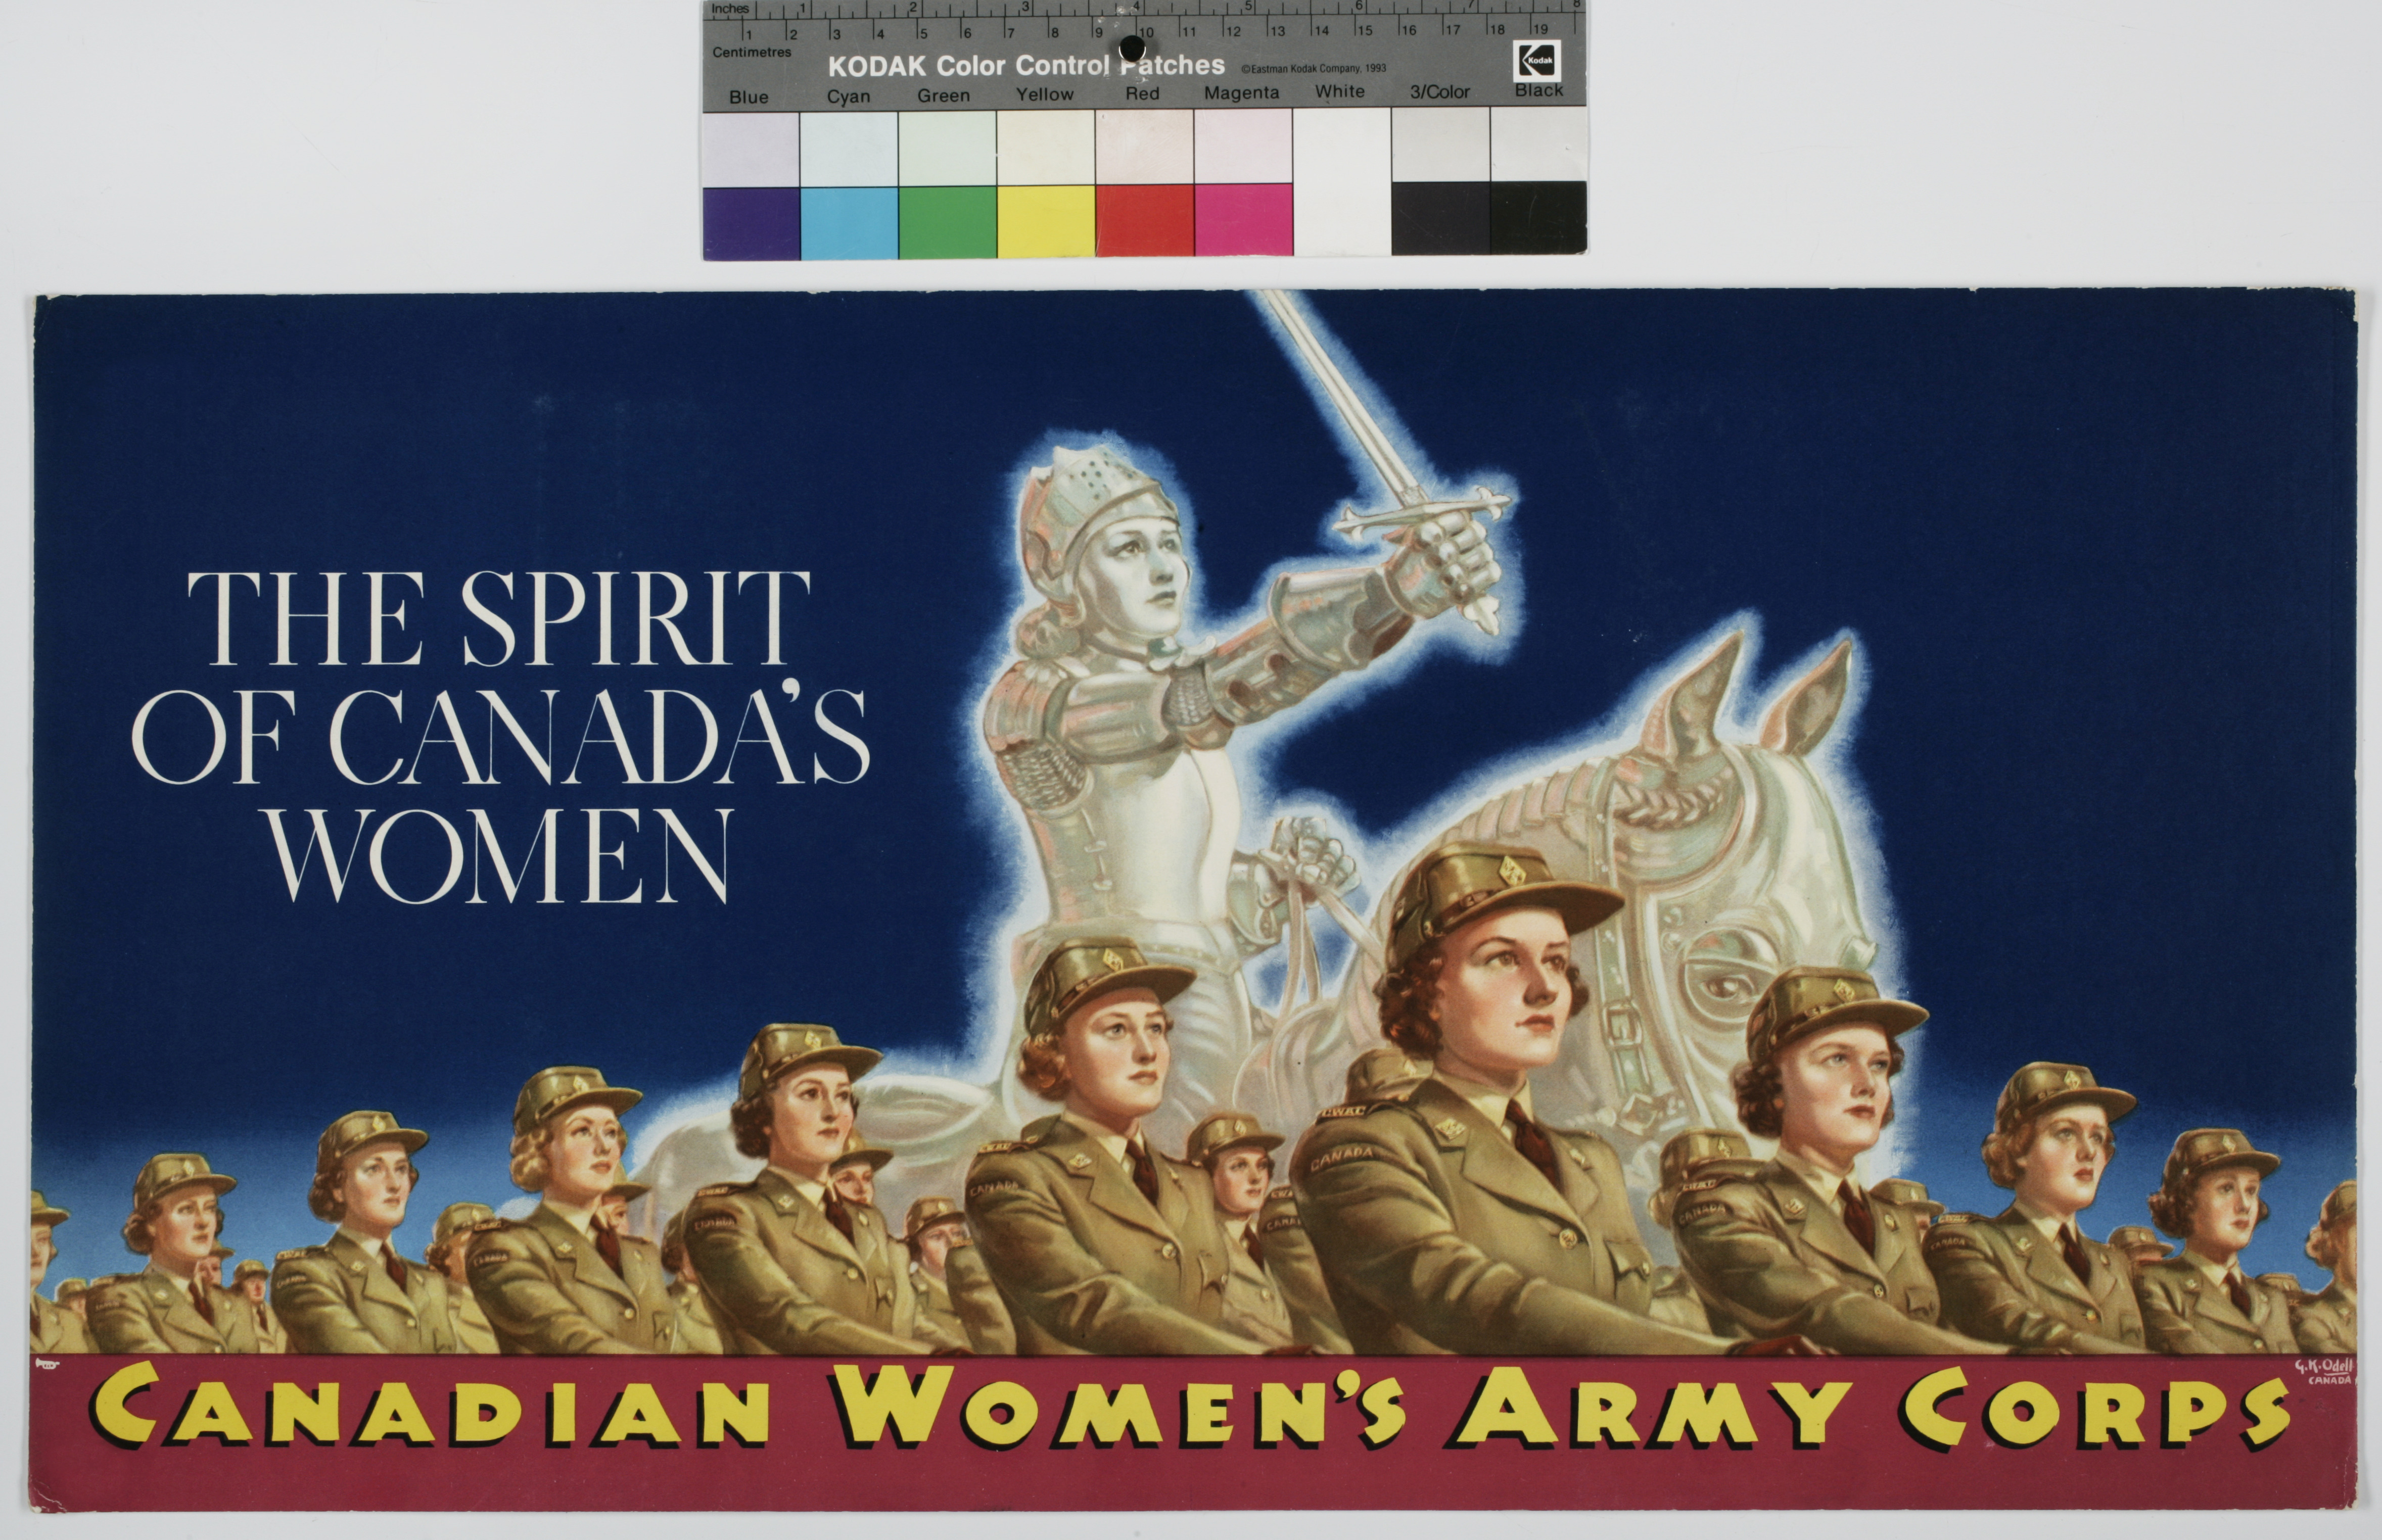 wartime recruiting poster, THE SPIRIT OF CANADA'S WOMEN CANADIAN